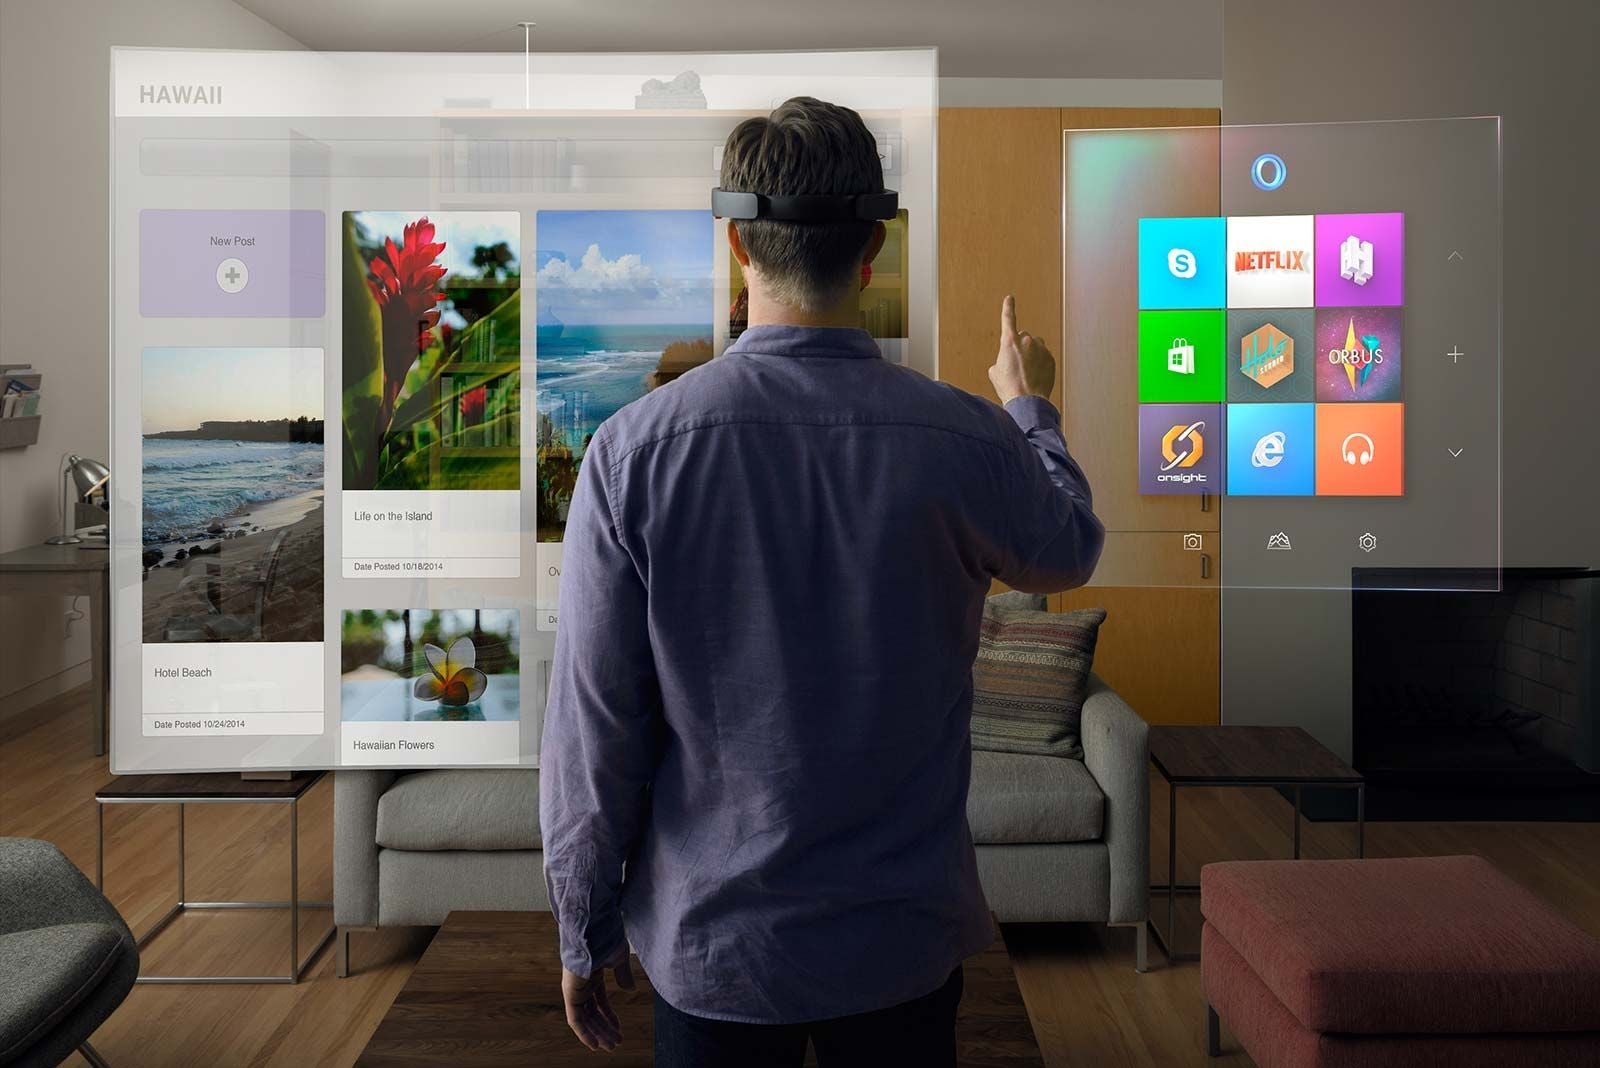 Microsoft HoloLens finally ventures outside of North America in latest expansion